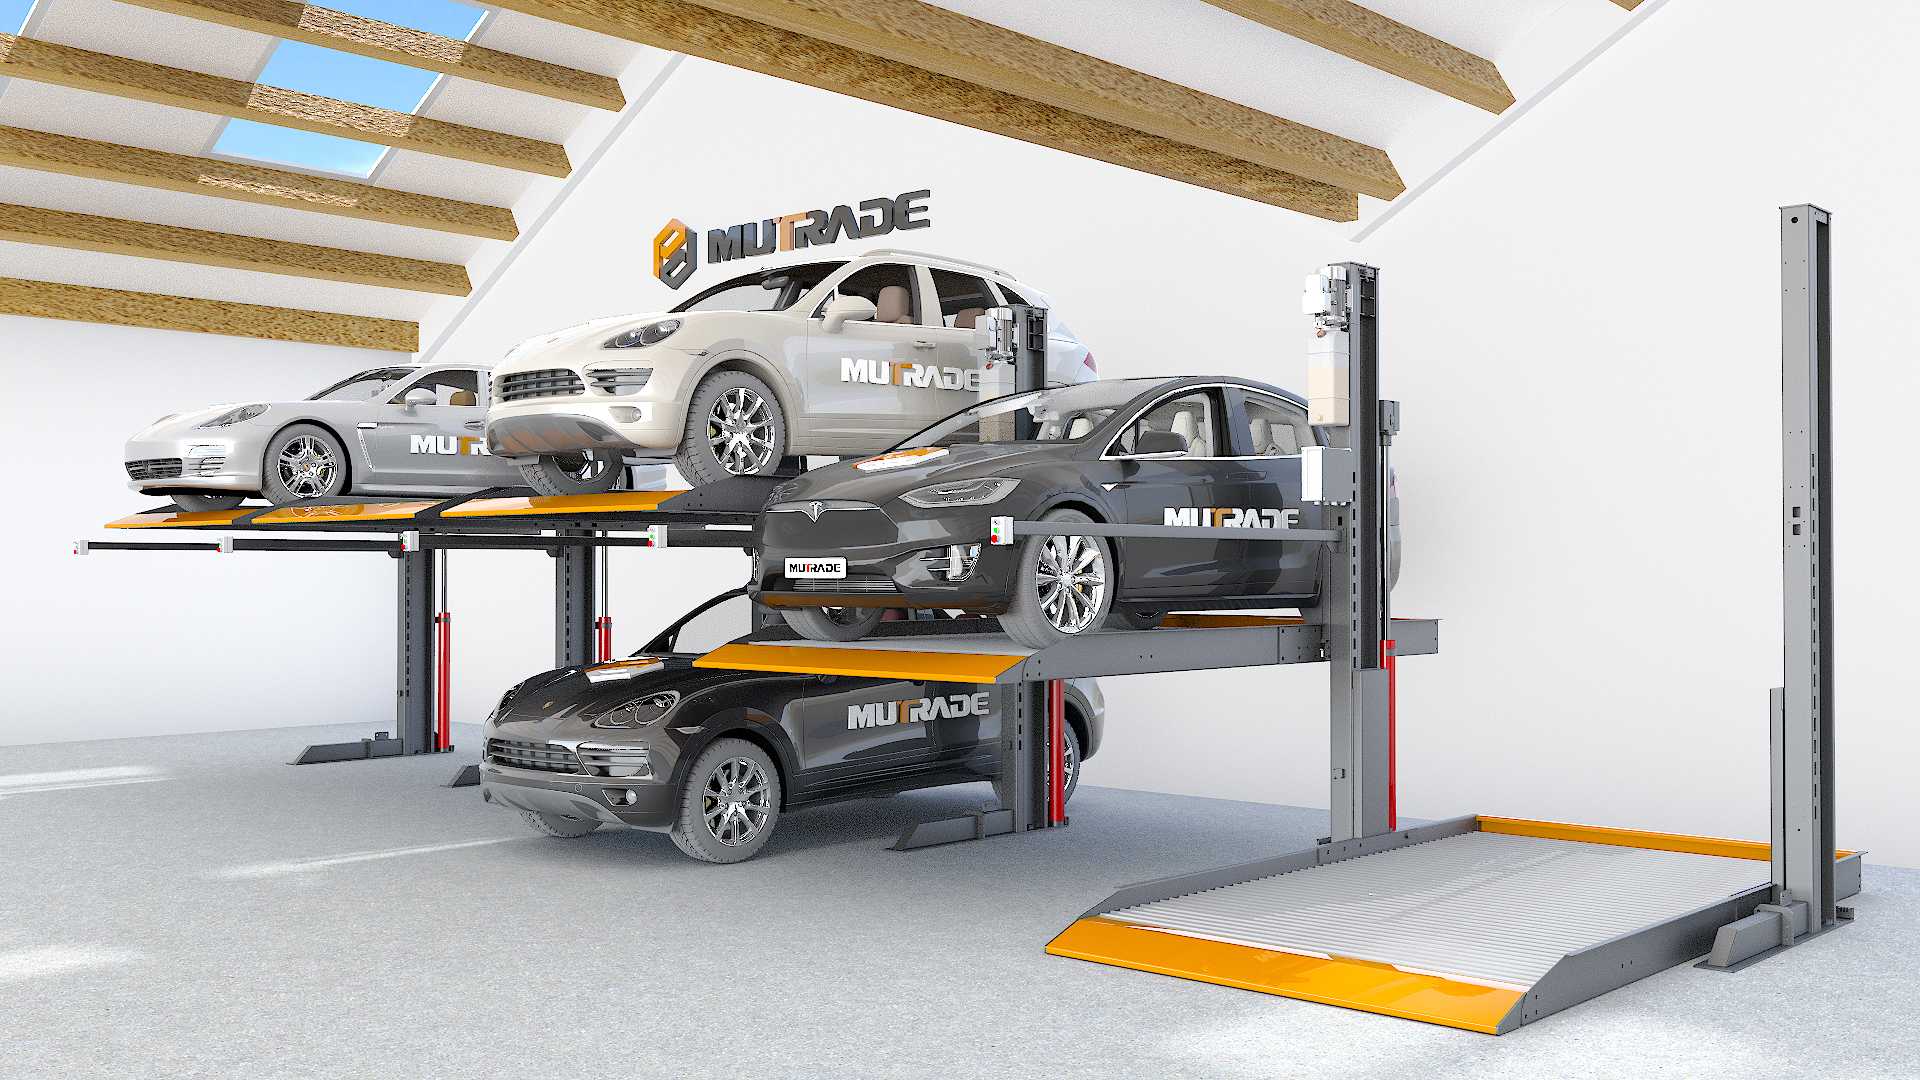 muntrade china car parking lift 2 cars double parking space car stacker manufacturer